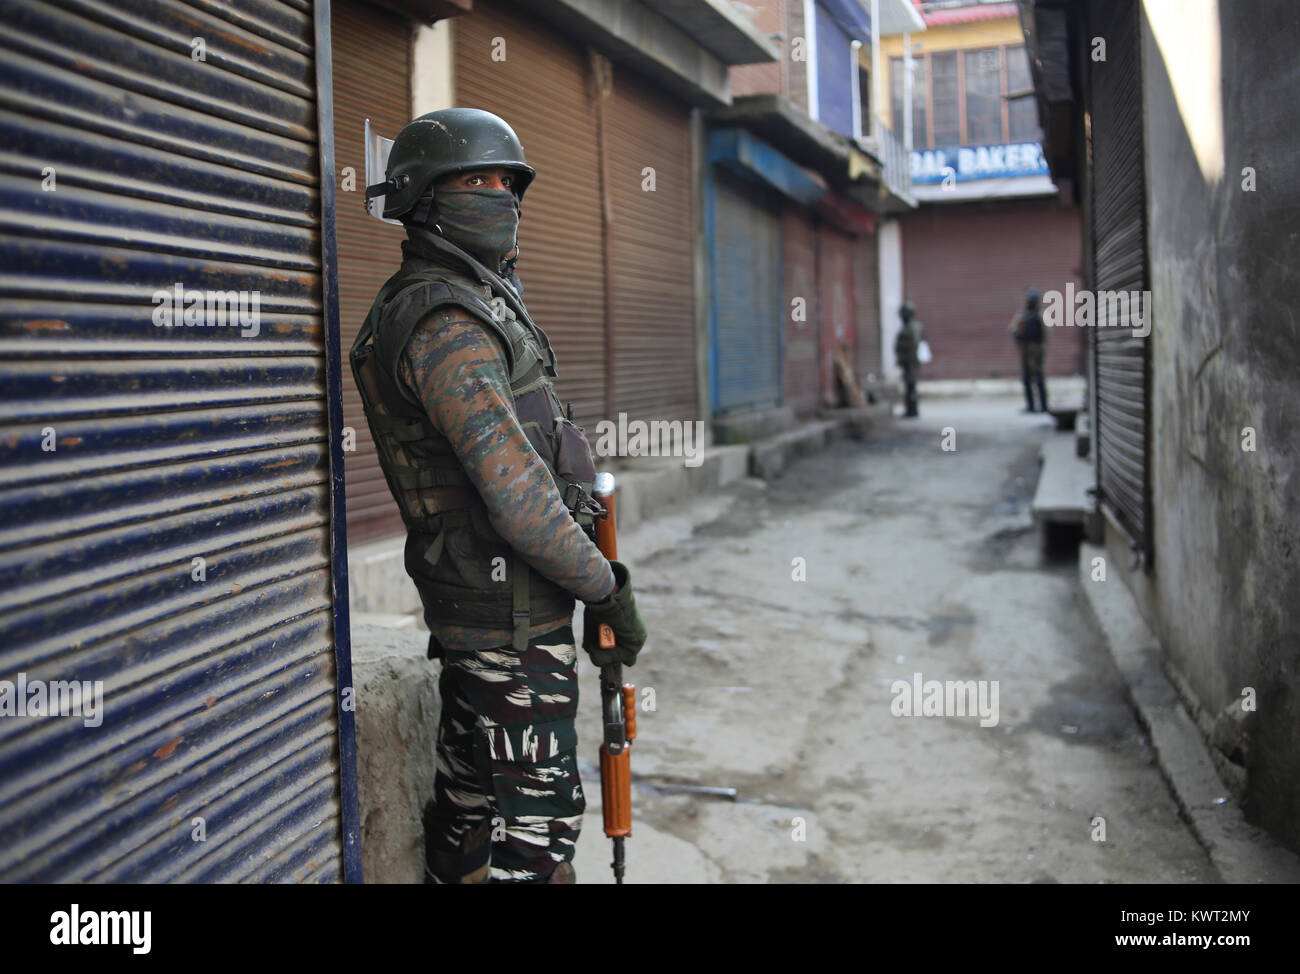 Sopore, . 6th Jan, 2018. Indian paramilitary troopers stand guard near the site of an improvised explosive device (IED) blast in Sopore town of Baramulla district, about 50 km northwest of Srinagar city, the summer capital of , on Jan. 6, 2018. At least four policemen were killed and two others wounded Saturday after militants triggered an improvised explosive device (IED) blast in restive , police said. Credit: Javed Dar/Xinhua/Alamy Live News Stock Photo